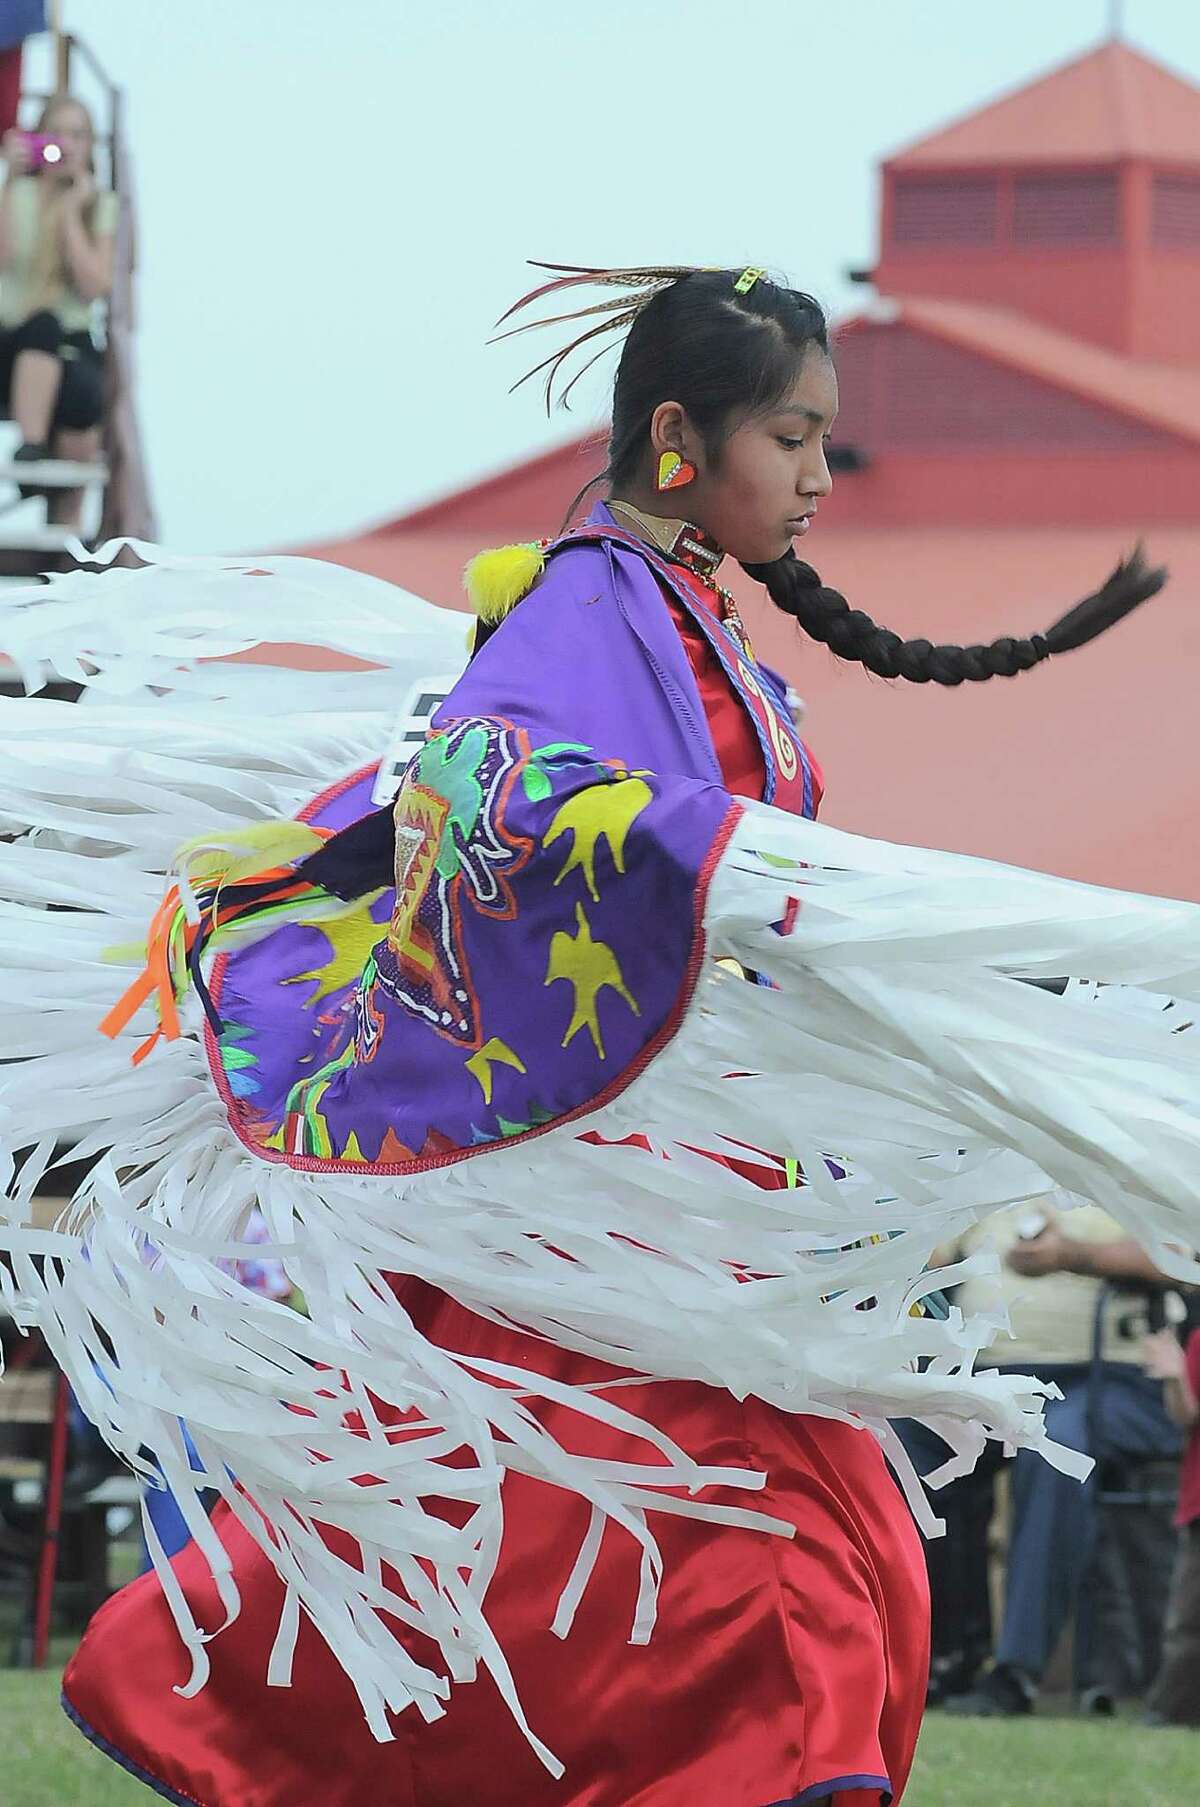 Alexis Gaines (15) from South Grand Prairie, Texas performs during the 24th Annual Texas Championship Pow Wow dance competition at Traders Village.